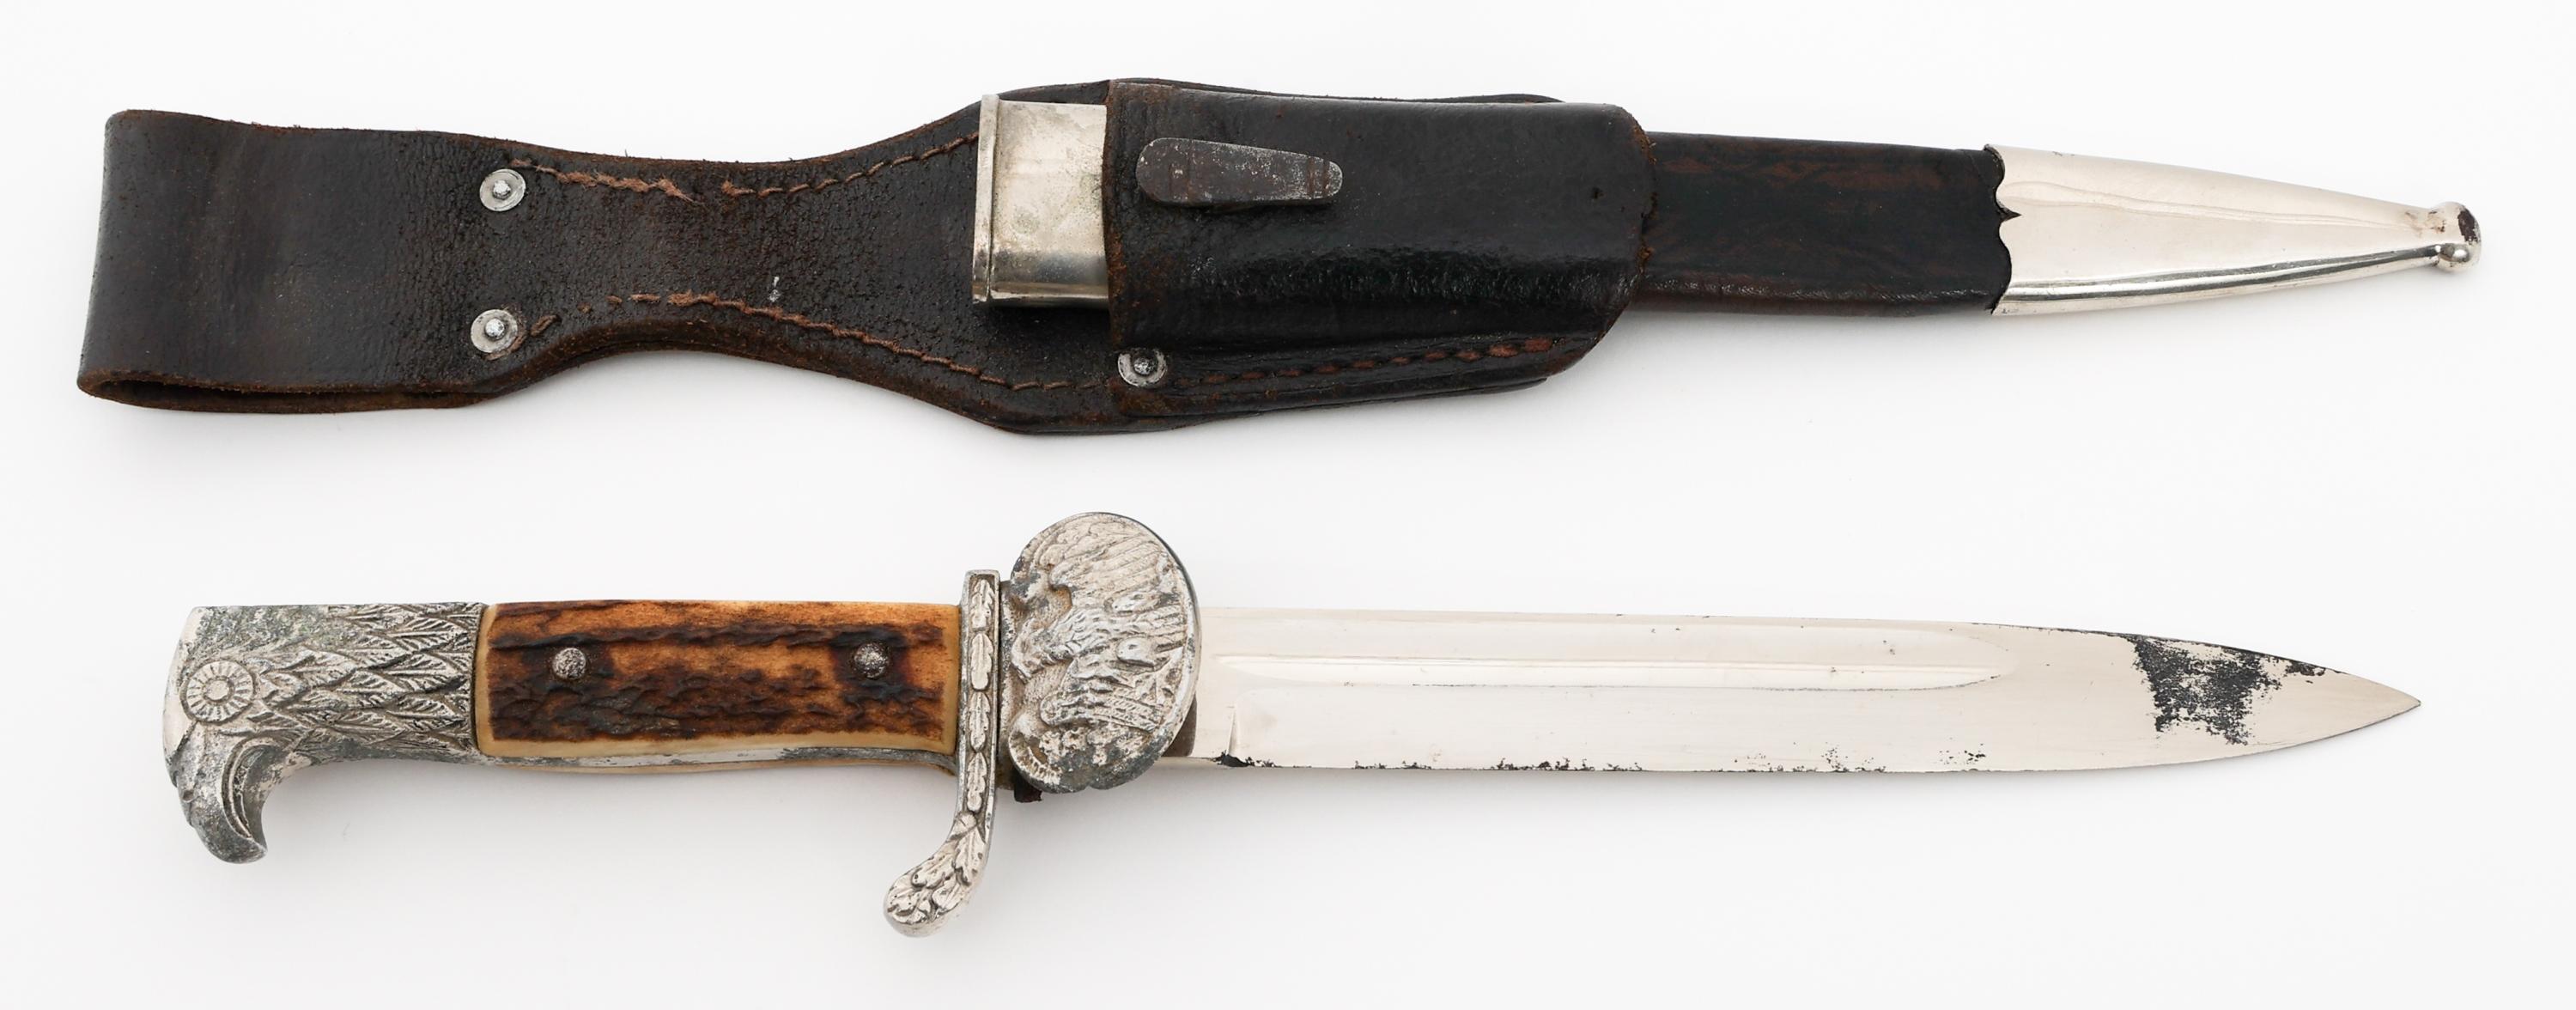 WEIMAR REPUBLIC POLICE CLAMSHELL BAYONET by CLEMEN